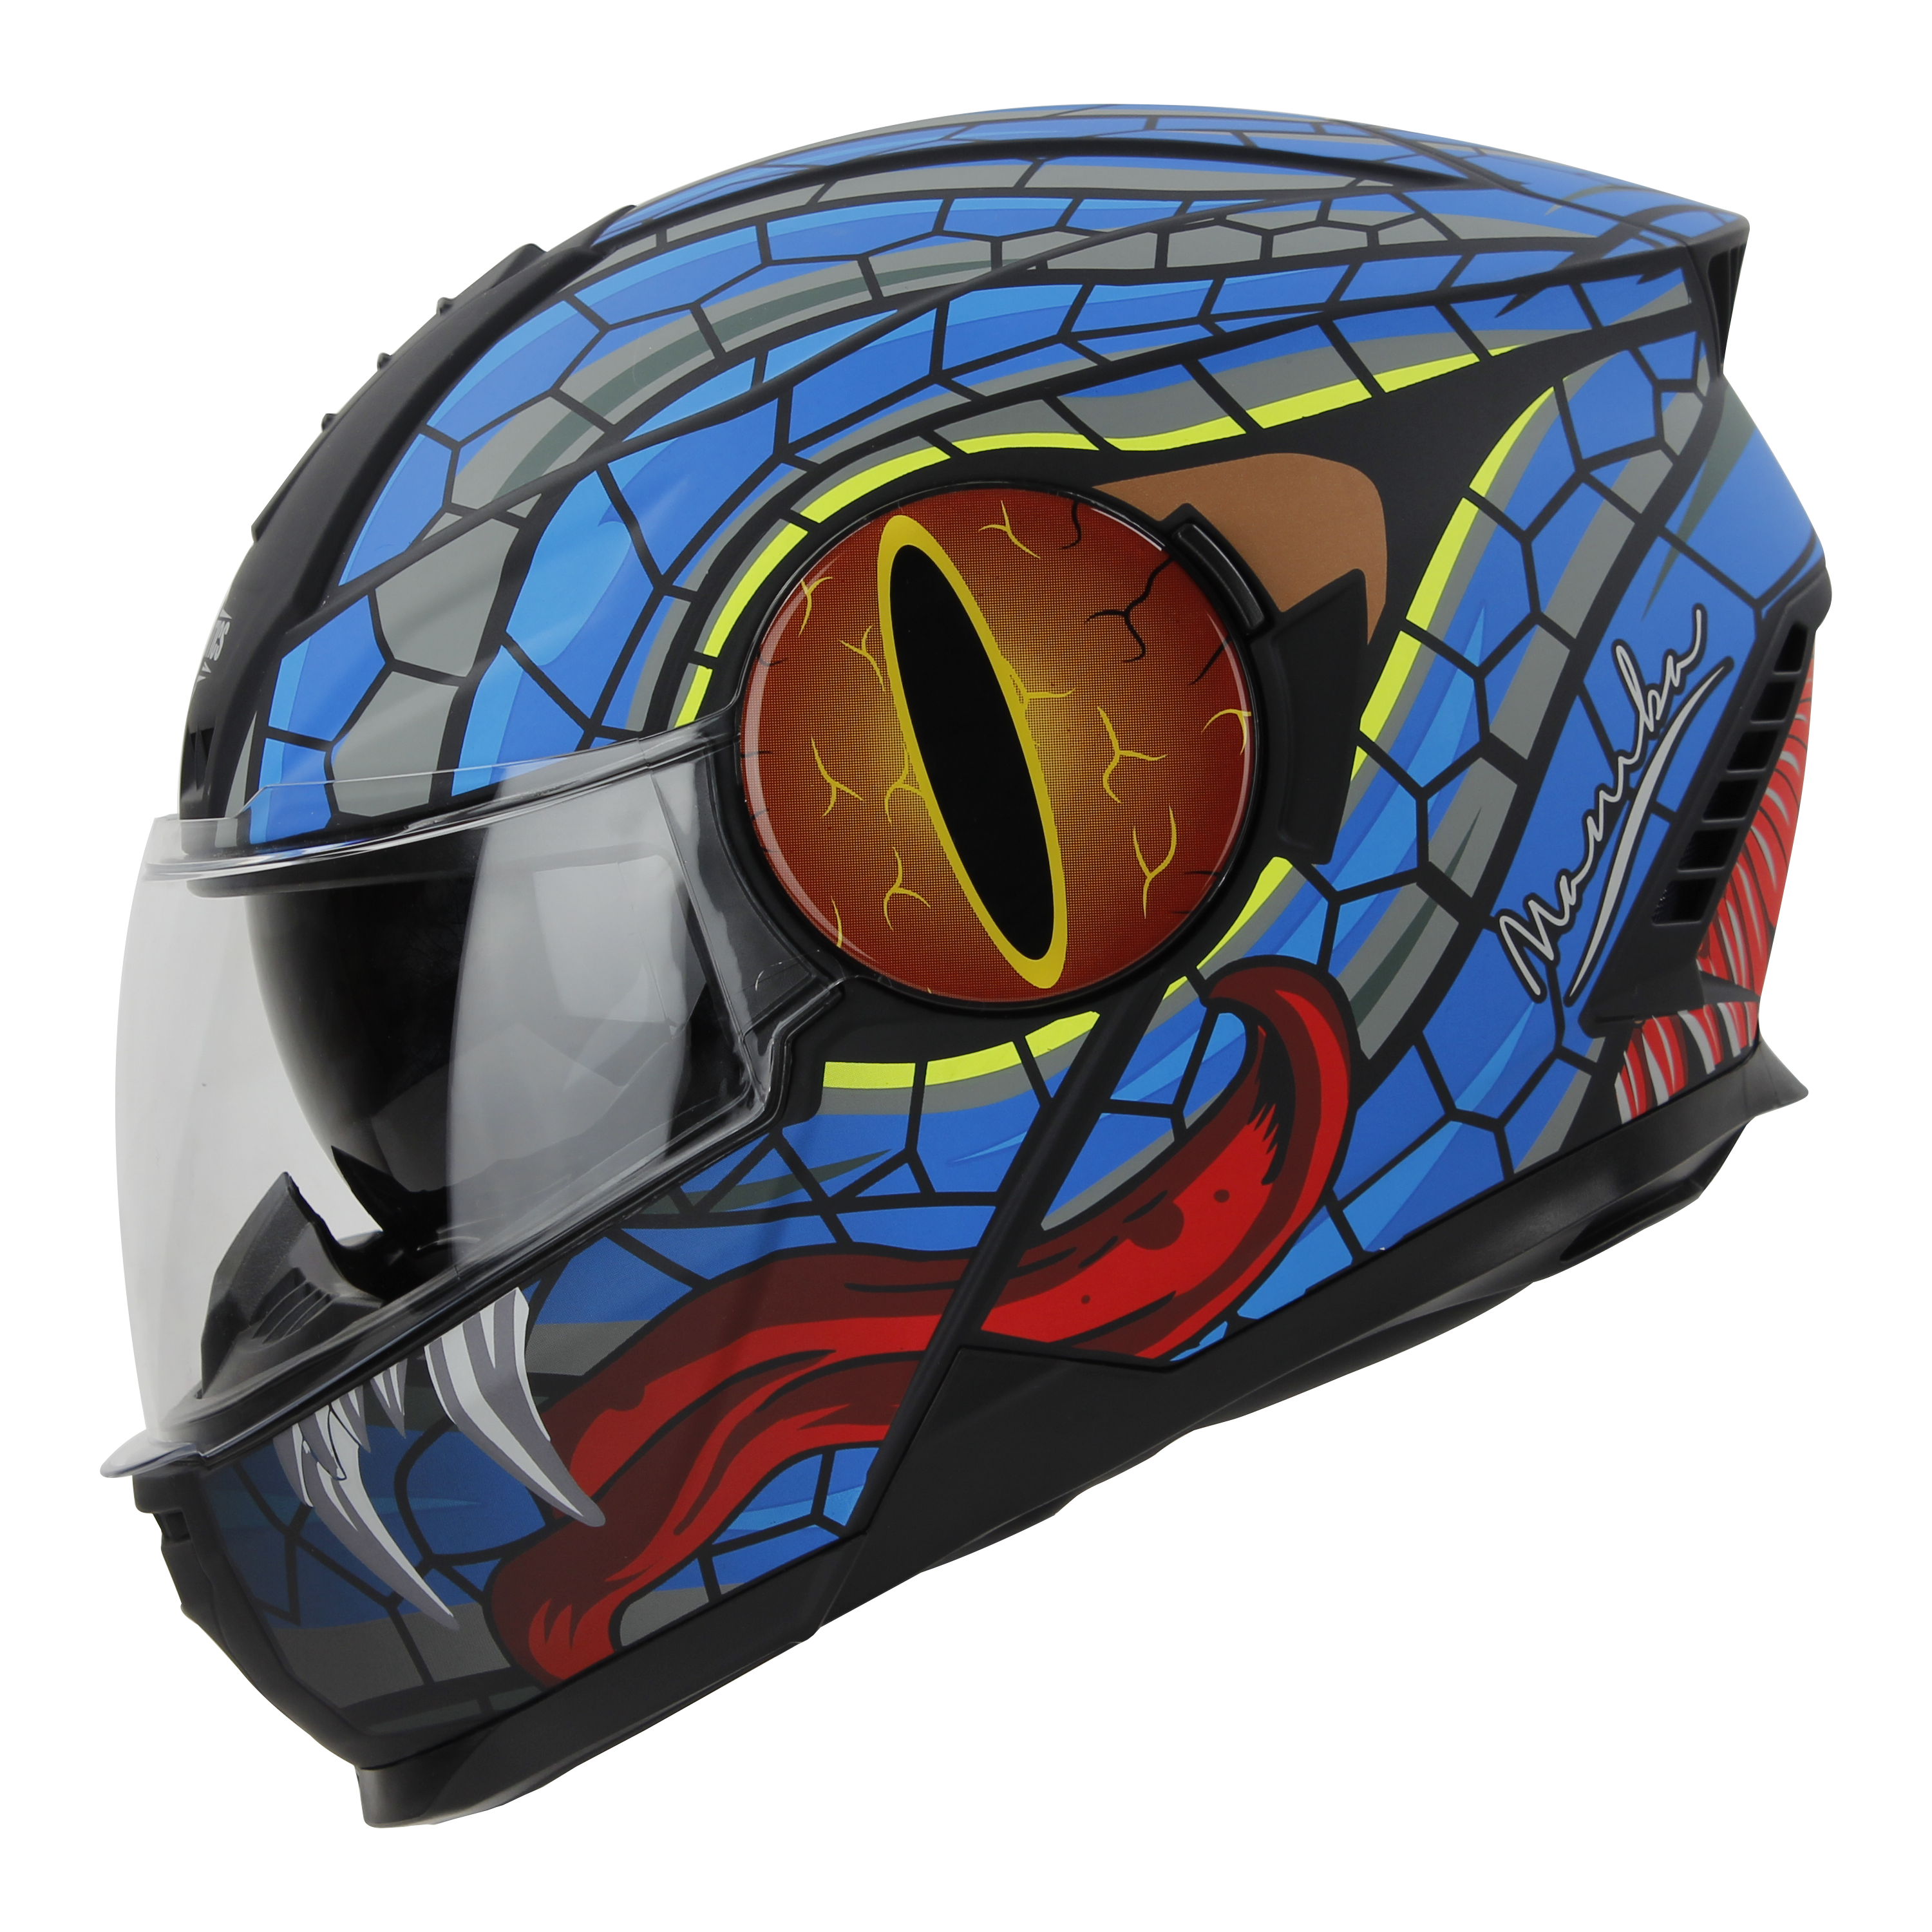 SBH-40 MAMBA MAT BLACK WITH BLUE (INNER SUN SHIELD AND HIGH-END INTERIOR)